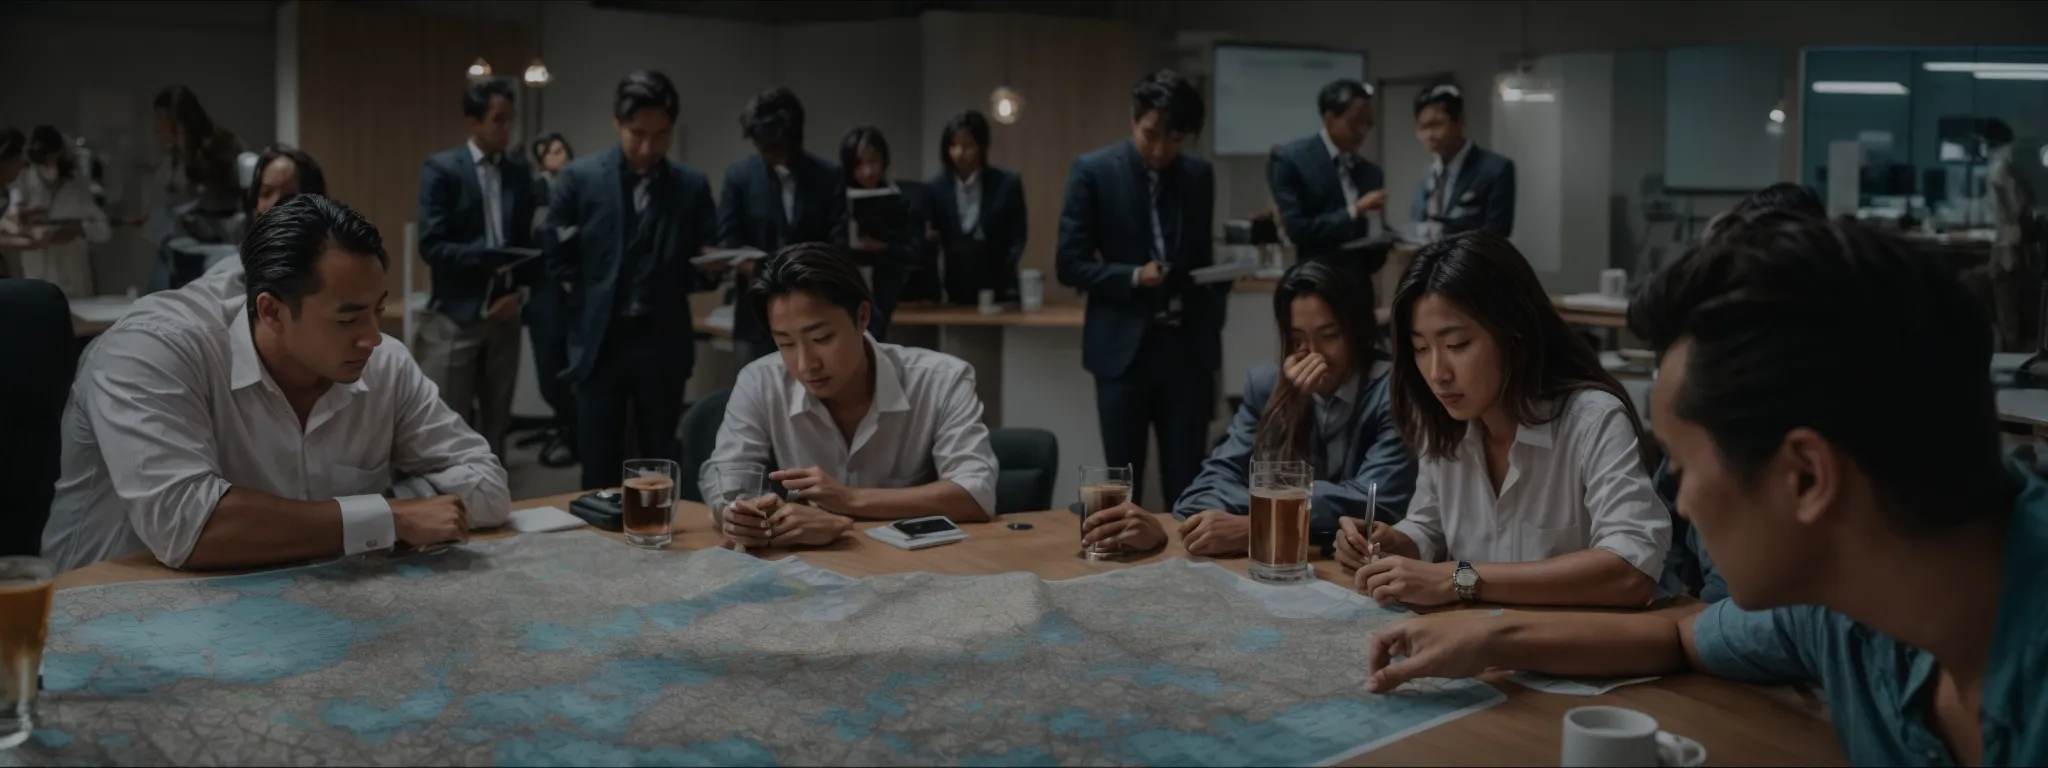 a group of professionals is gathered around a conference table, intently discussing strategies with a map of the local area spread out in front of them.